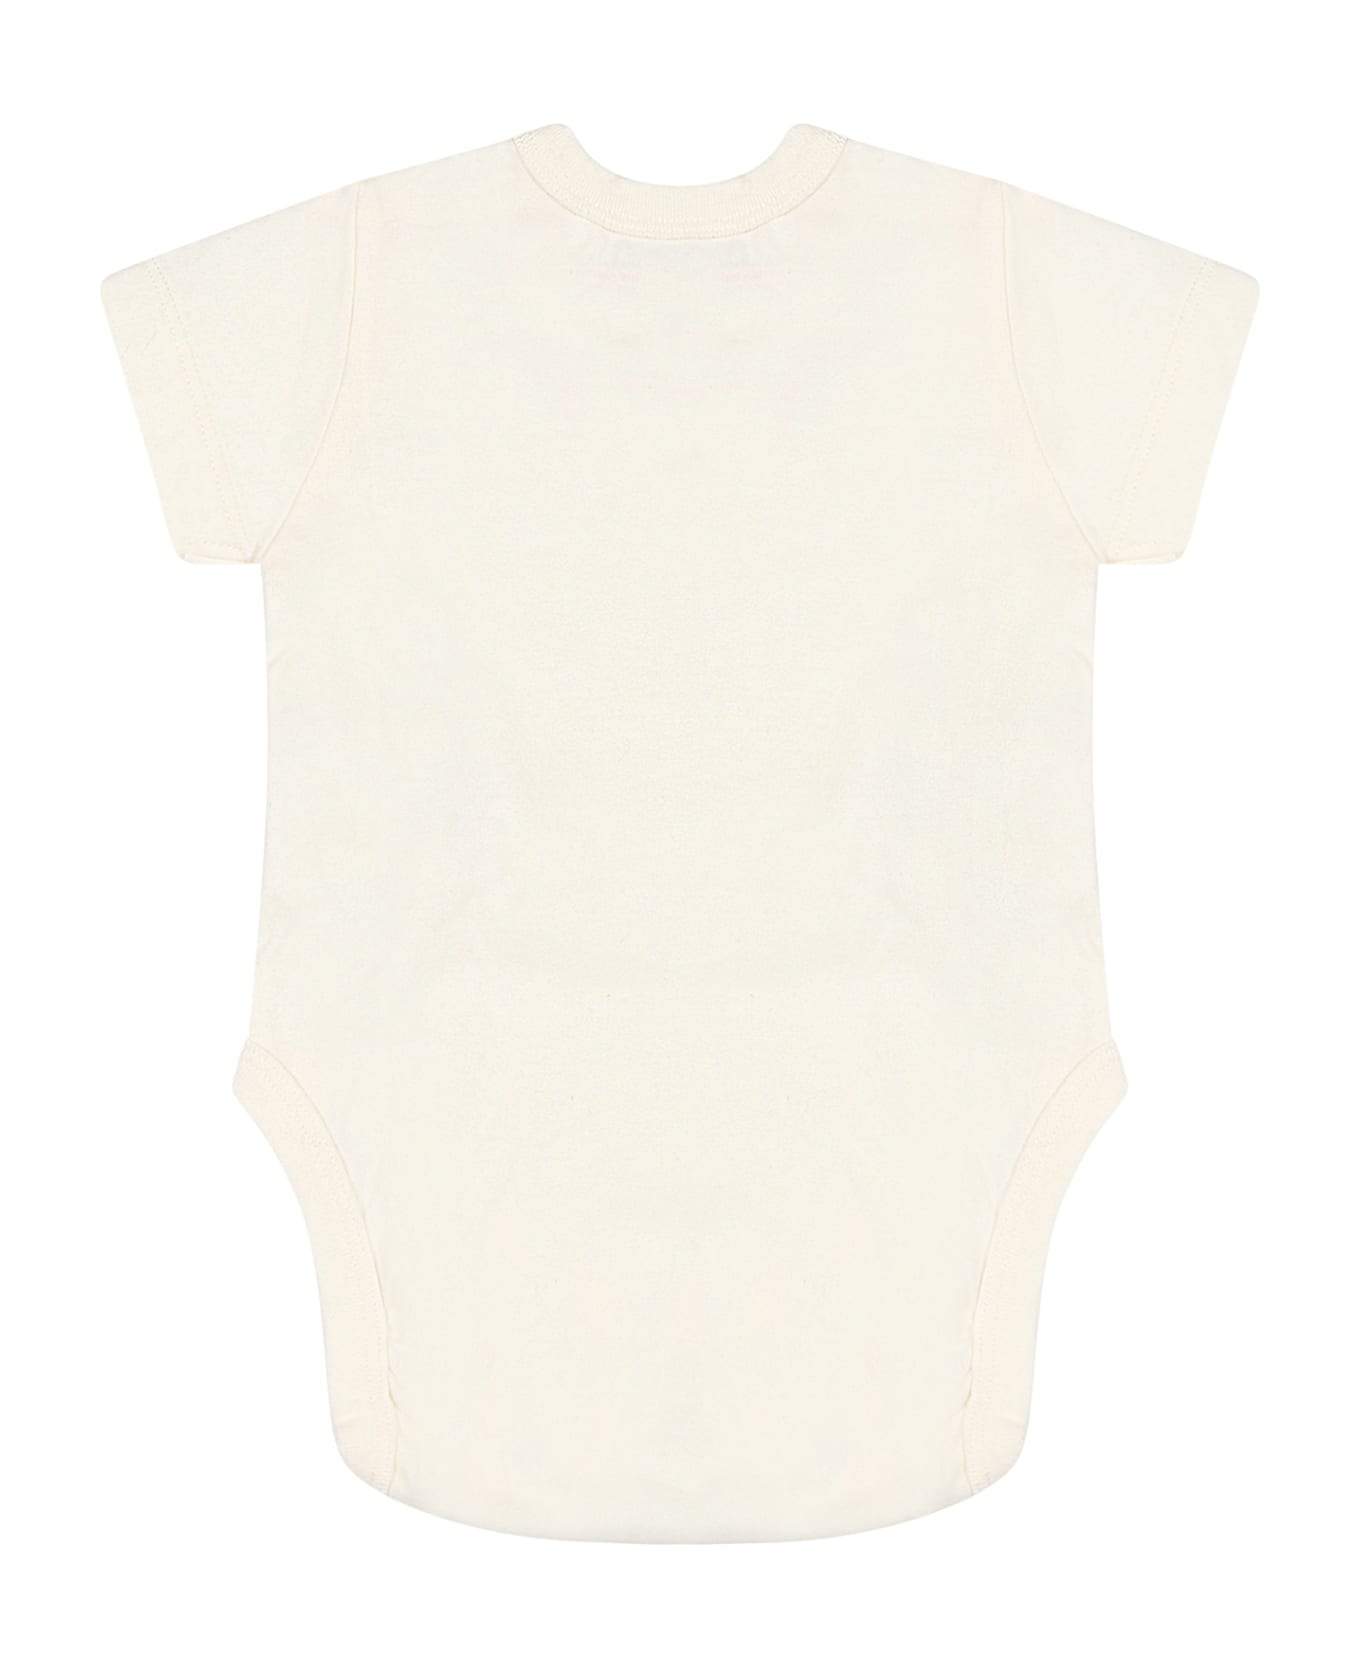 Off-White Multicolor Set For Baby Boy - Multicolor ボディスーツ＆セットアップ